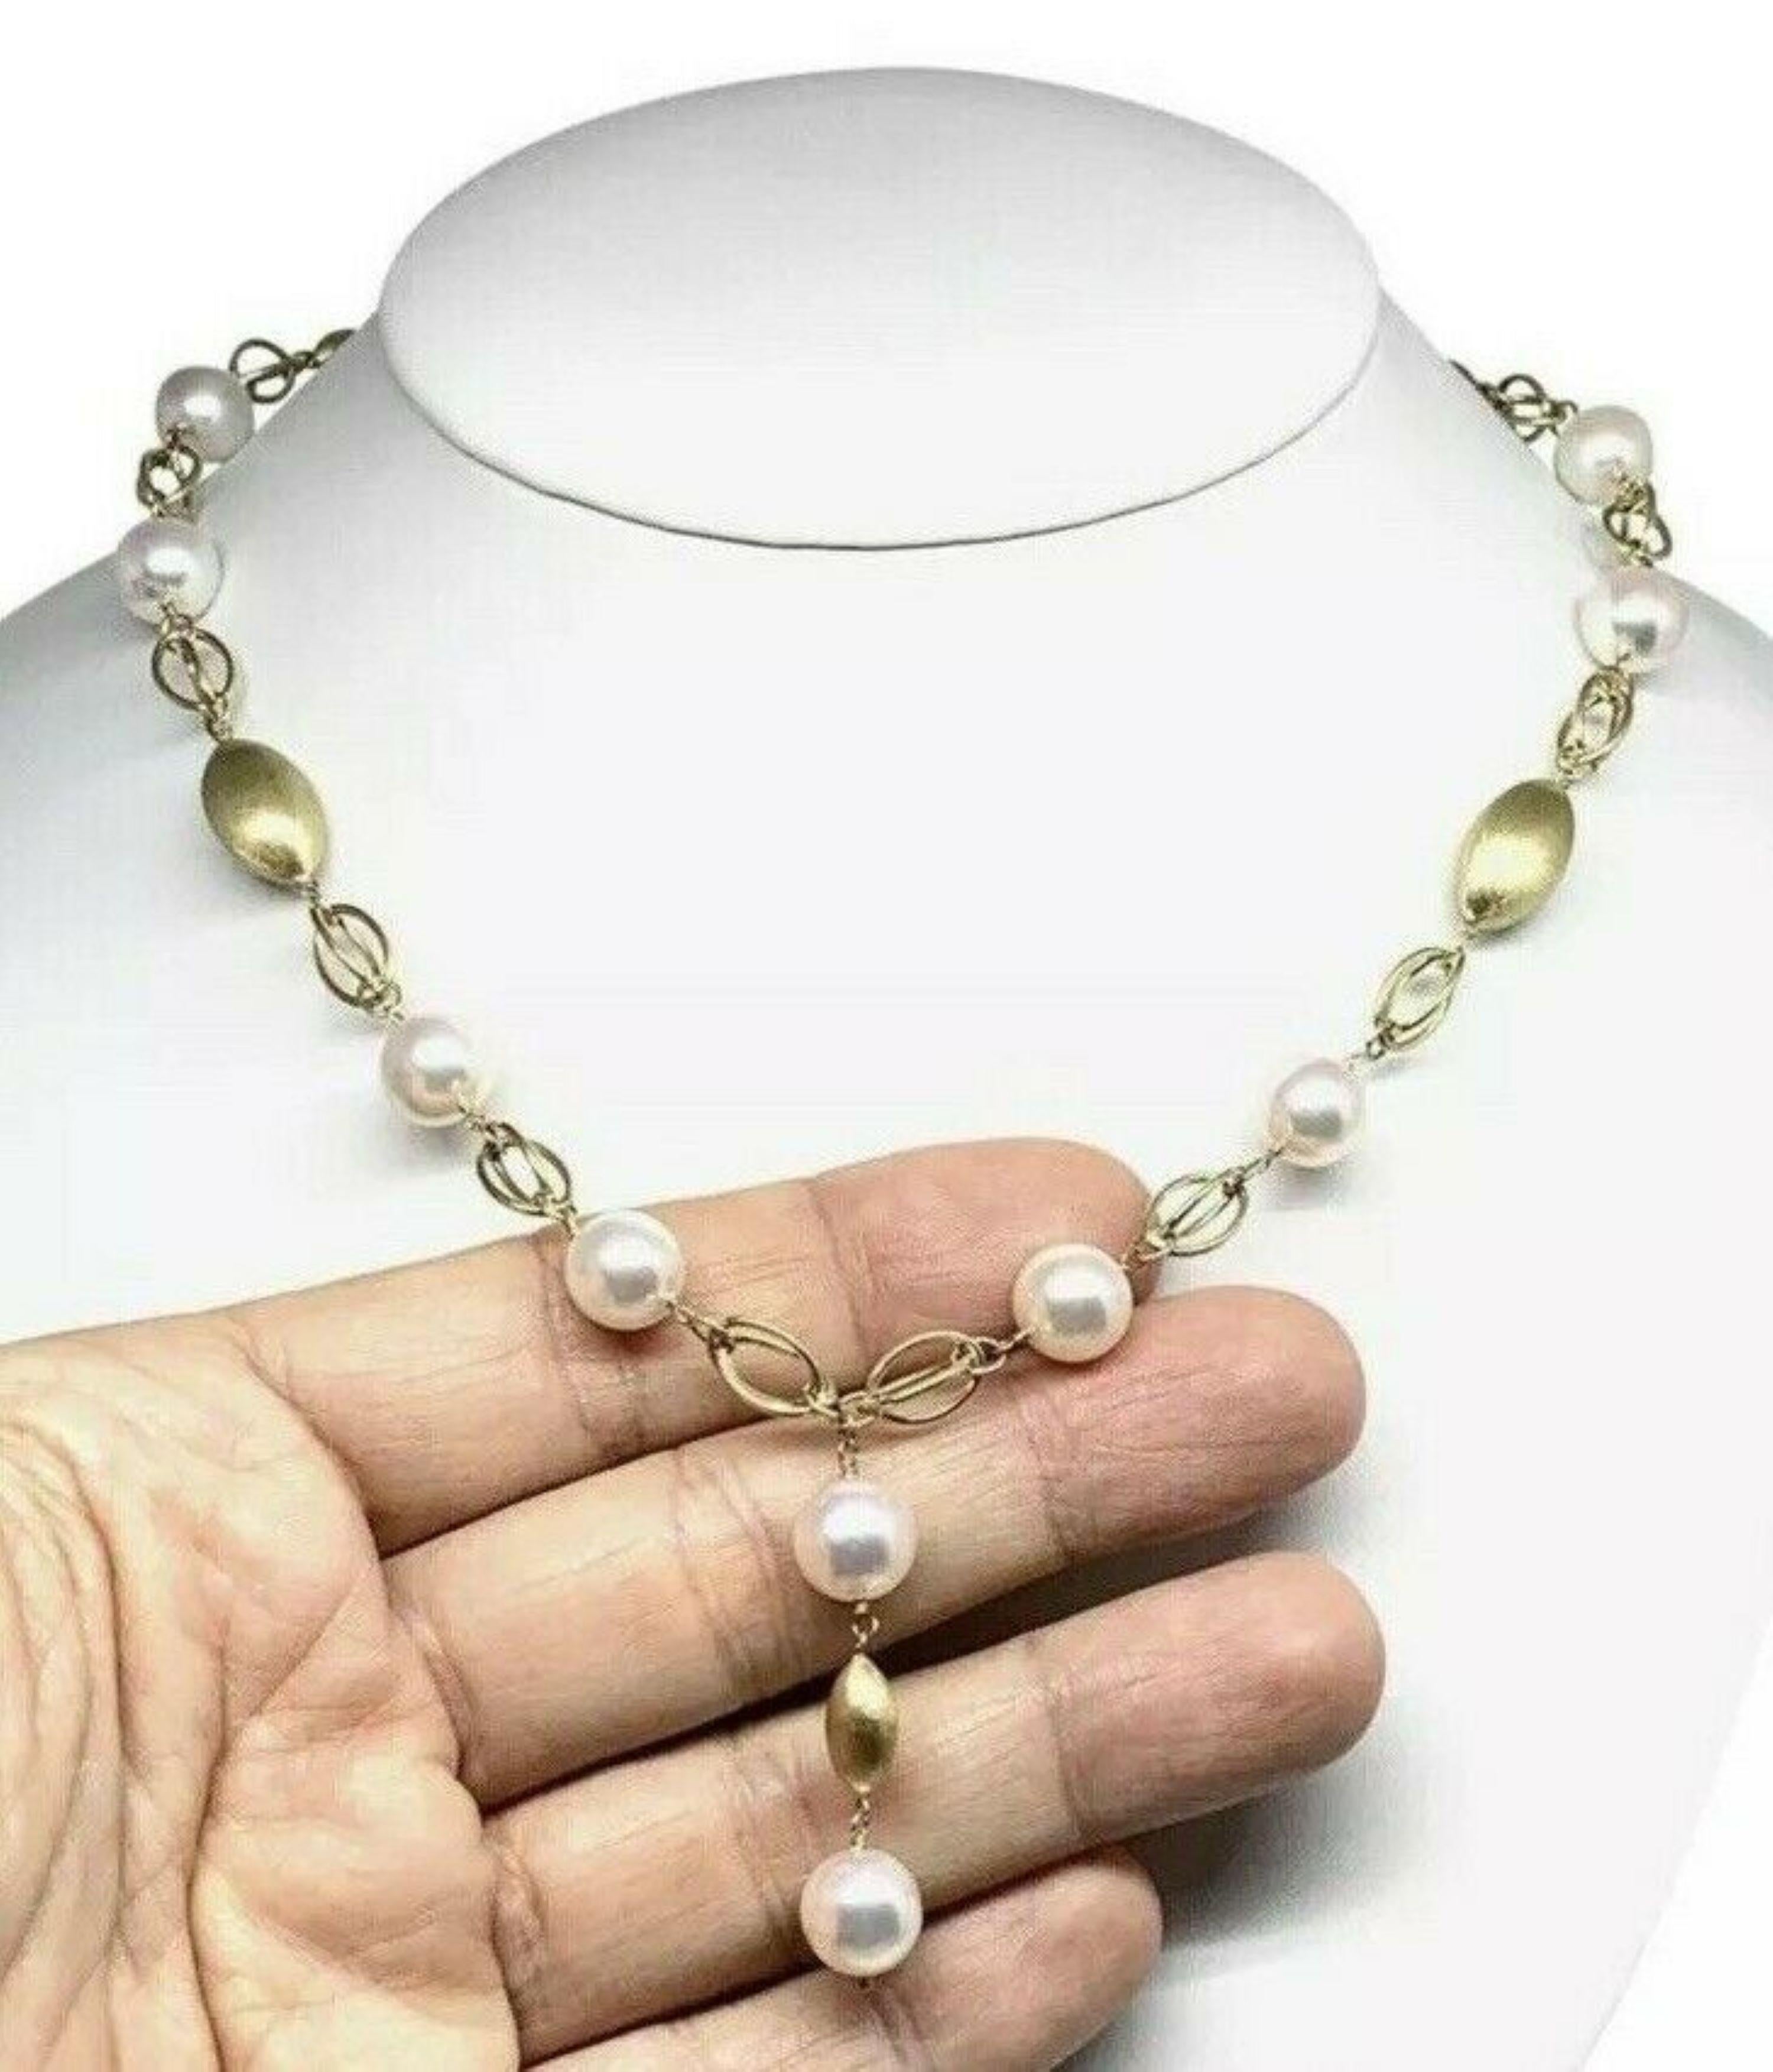 CERTIFIED $9,500 Authentic Saltwater Akoya Pearl Necklace & Earrings Set
Nothing says, “I Love ❤️ you” more than Diamonds and Pearls.

Beautiful Drop Earrings.  Suitable For Any Occasion!
This is a One of a Kind Unique Custom Made Glamorous Piece of